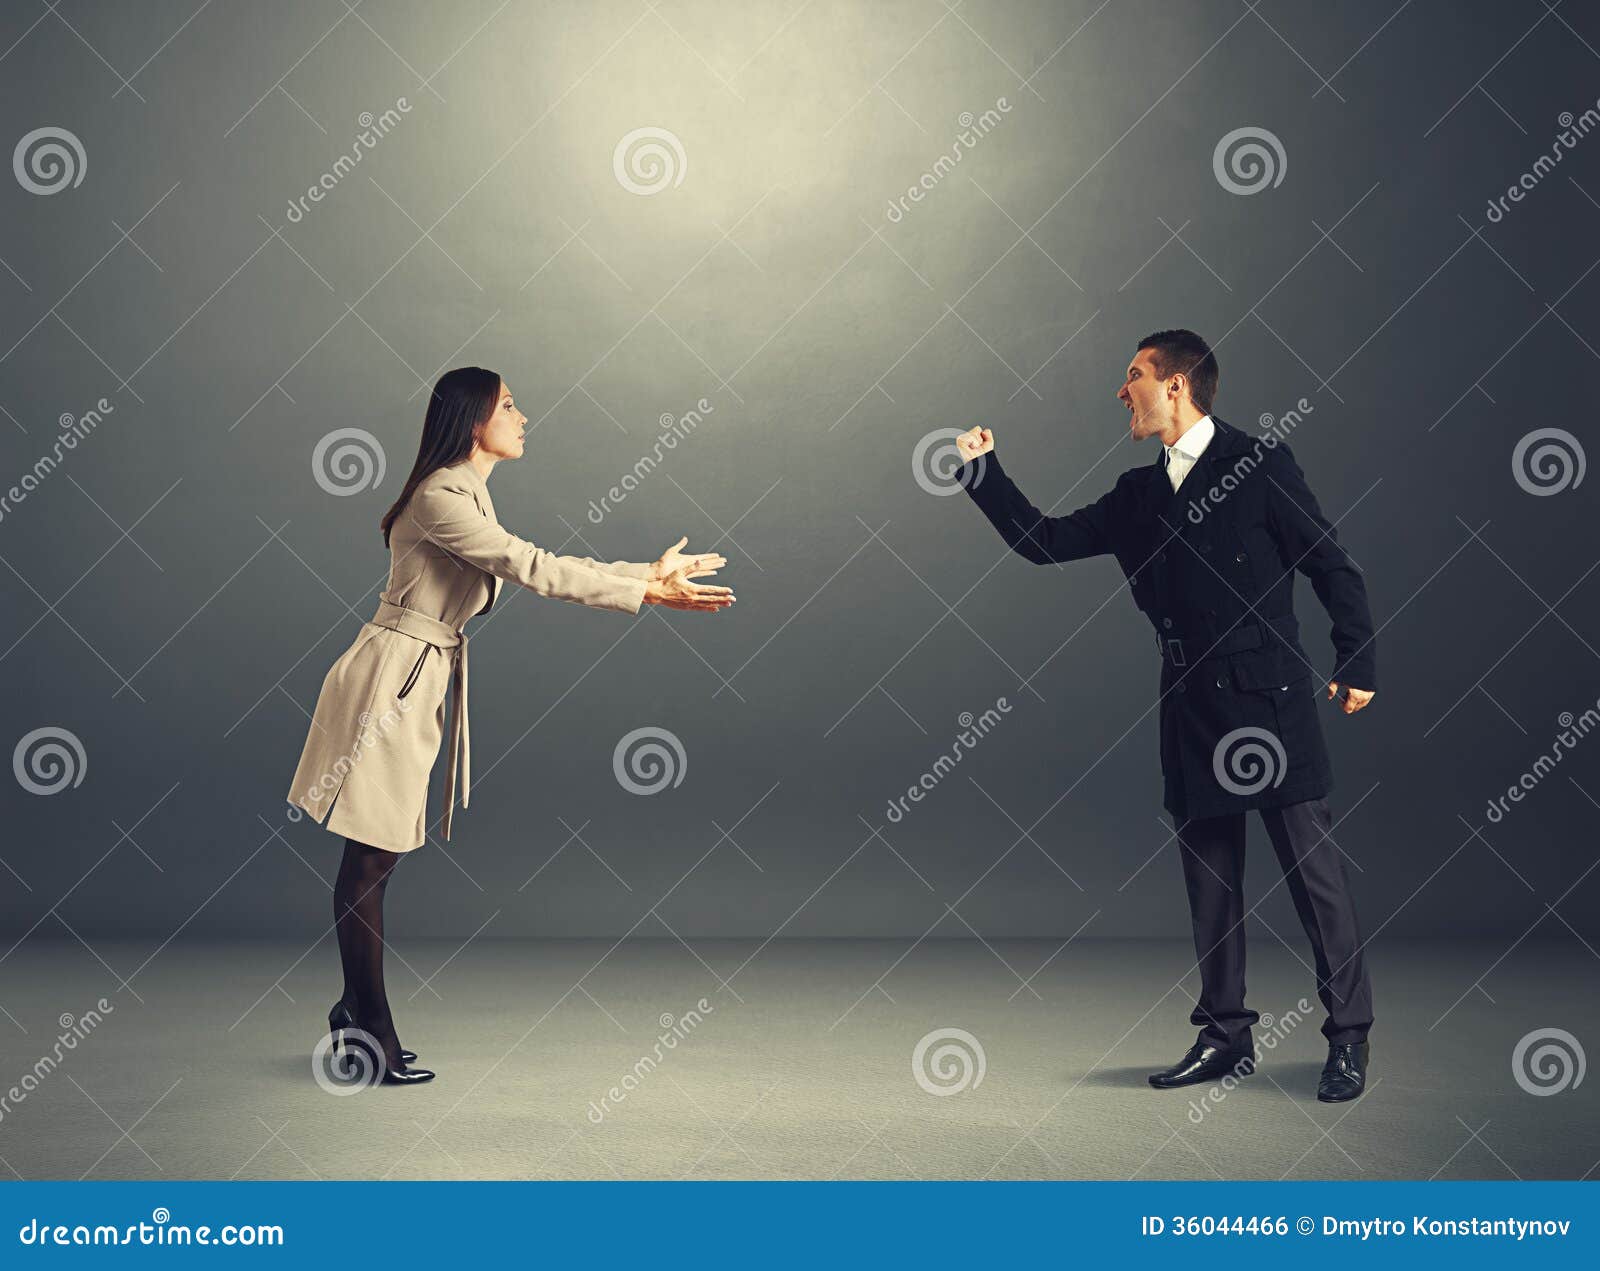 angry man at odds with young woman